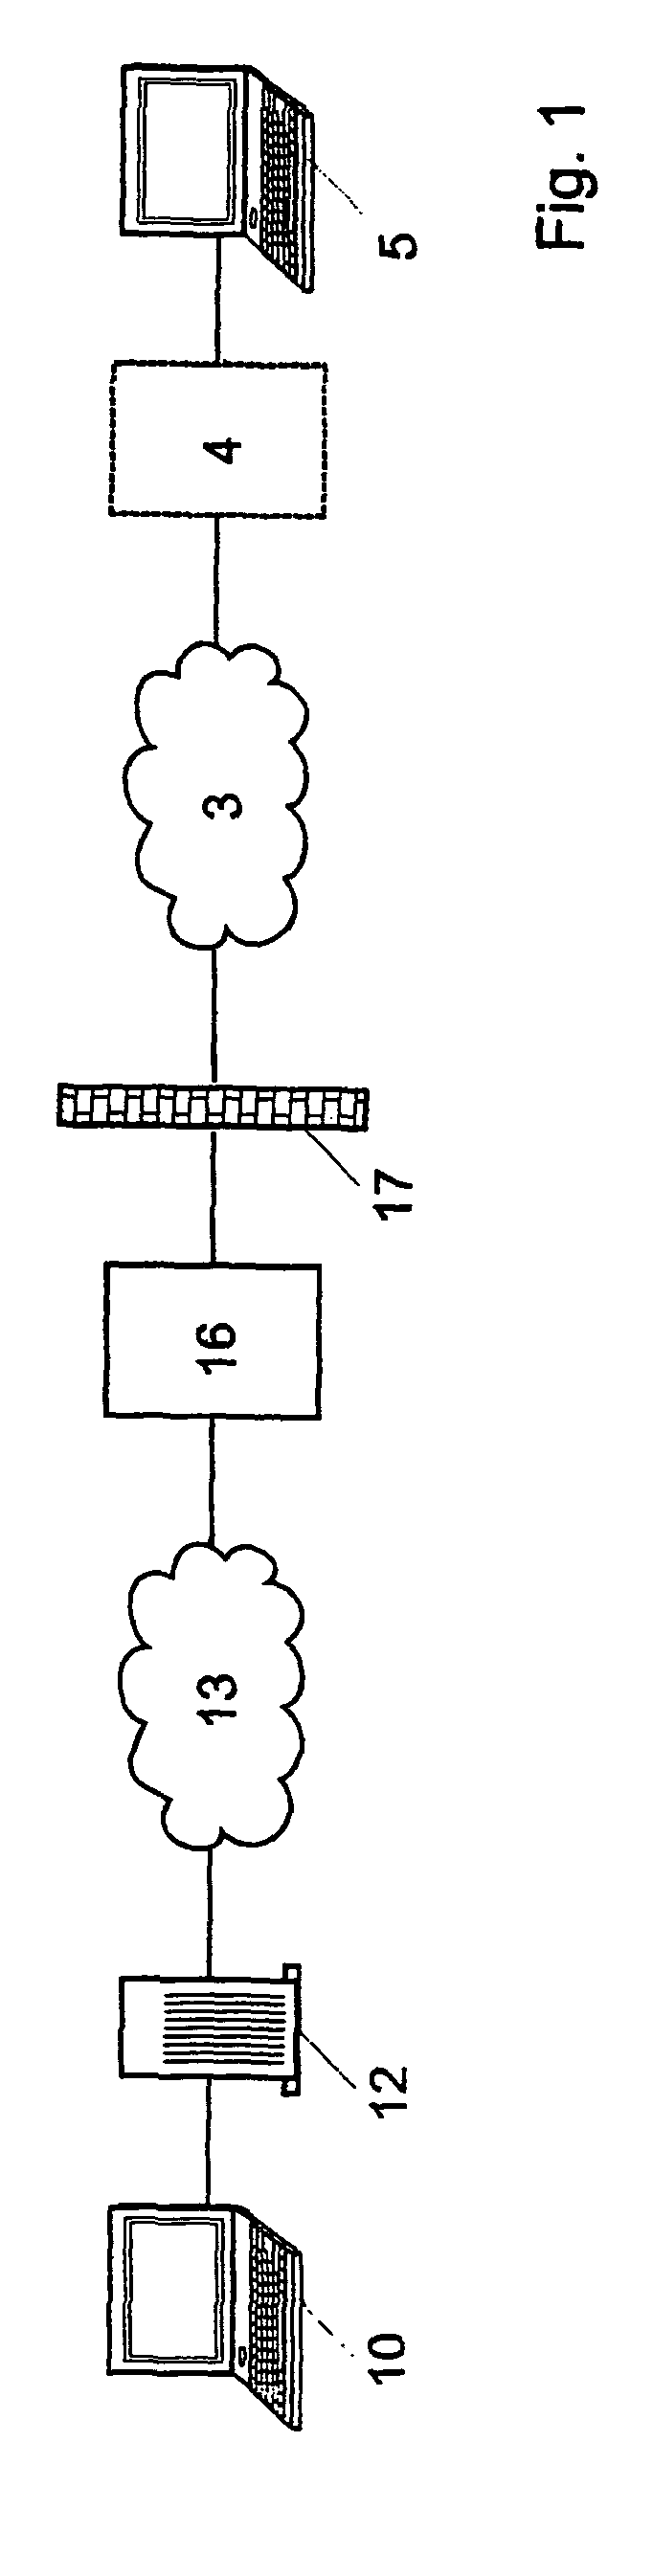 Method for establishing a secure e-mail communication channel between a sender and a recipient